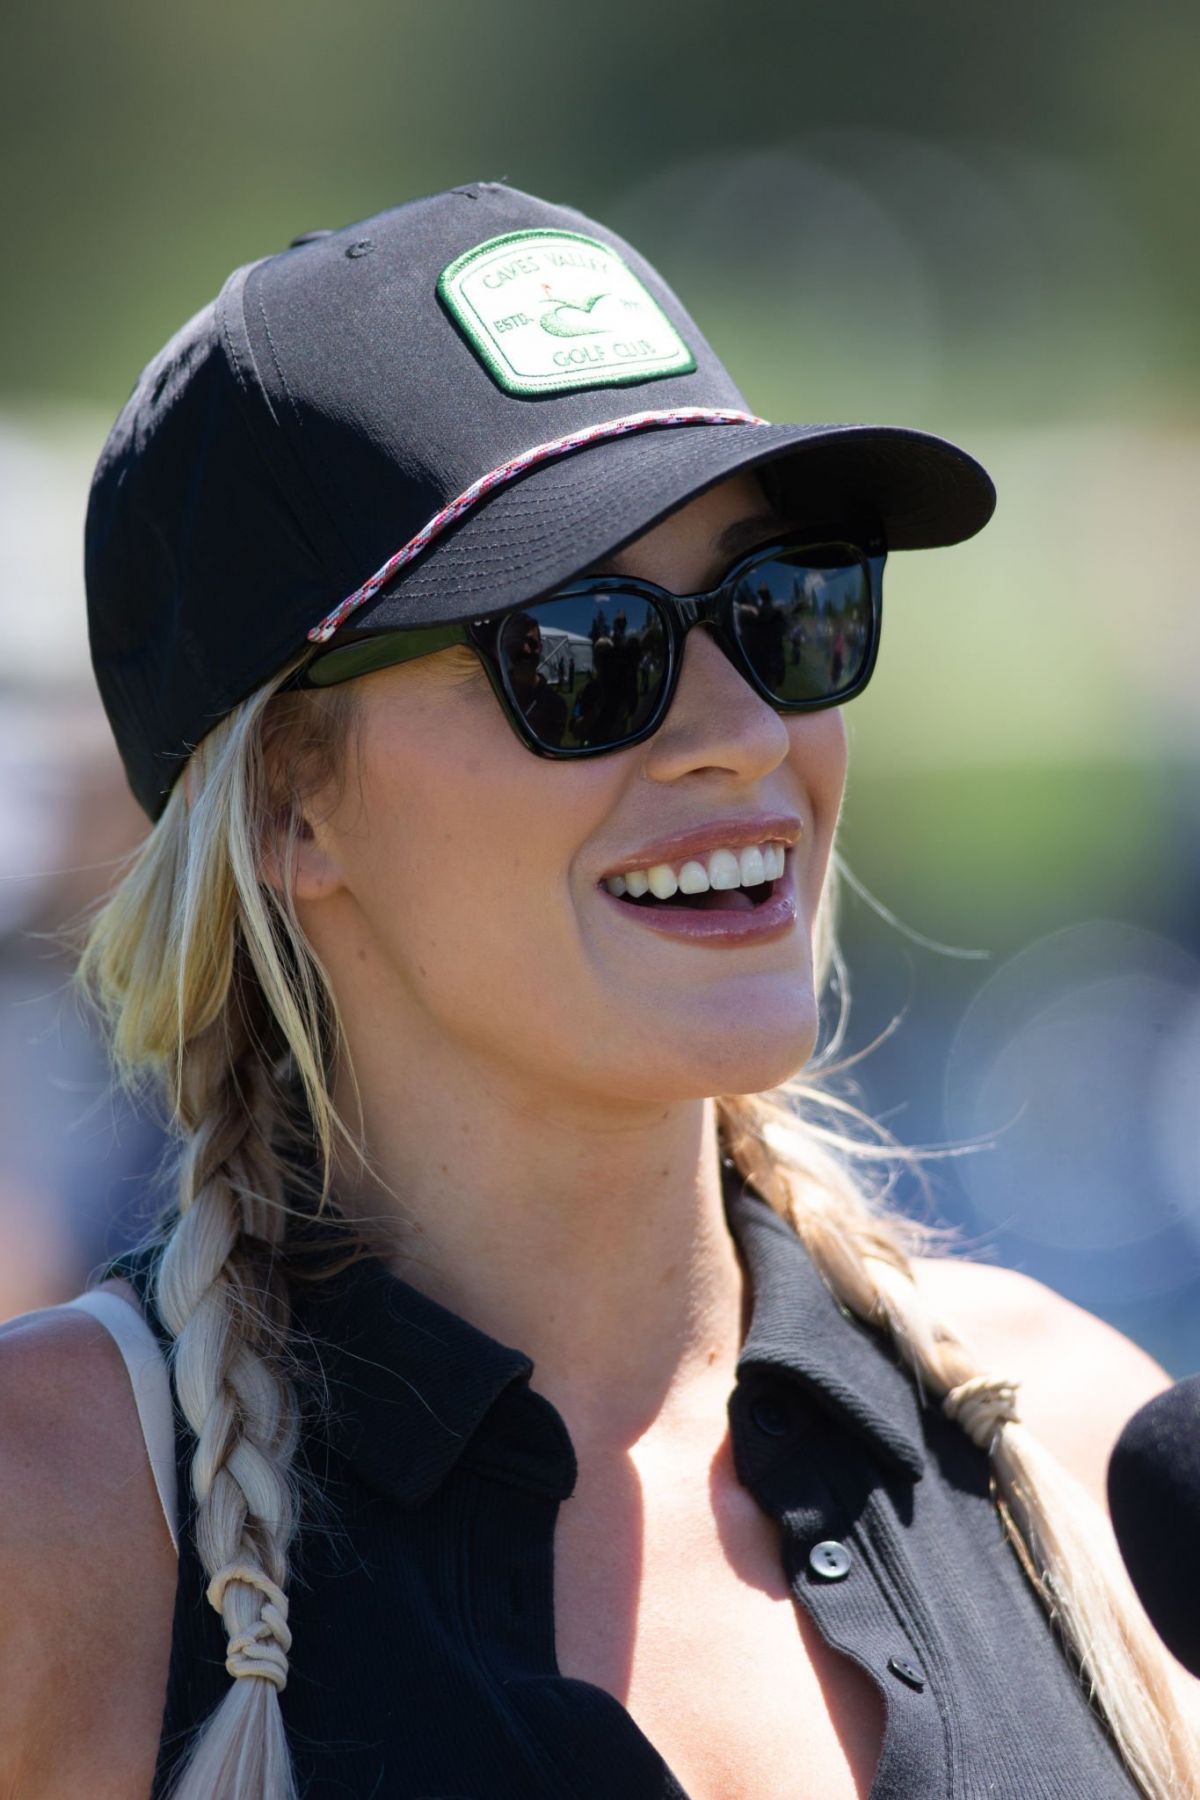 Paige Spiranac Reveals A New Look As She Explains How To Turn Pro In ...